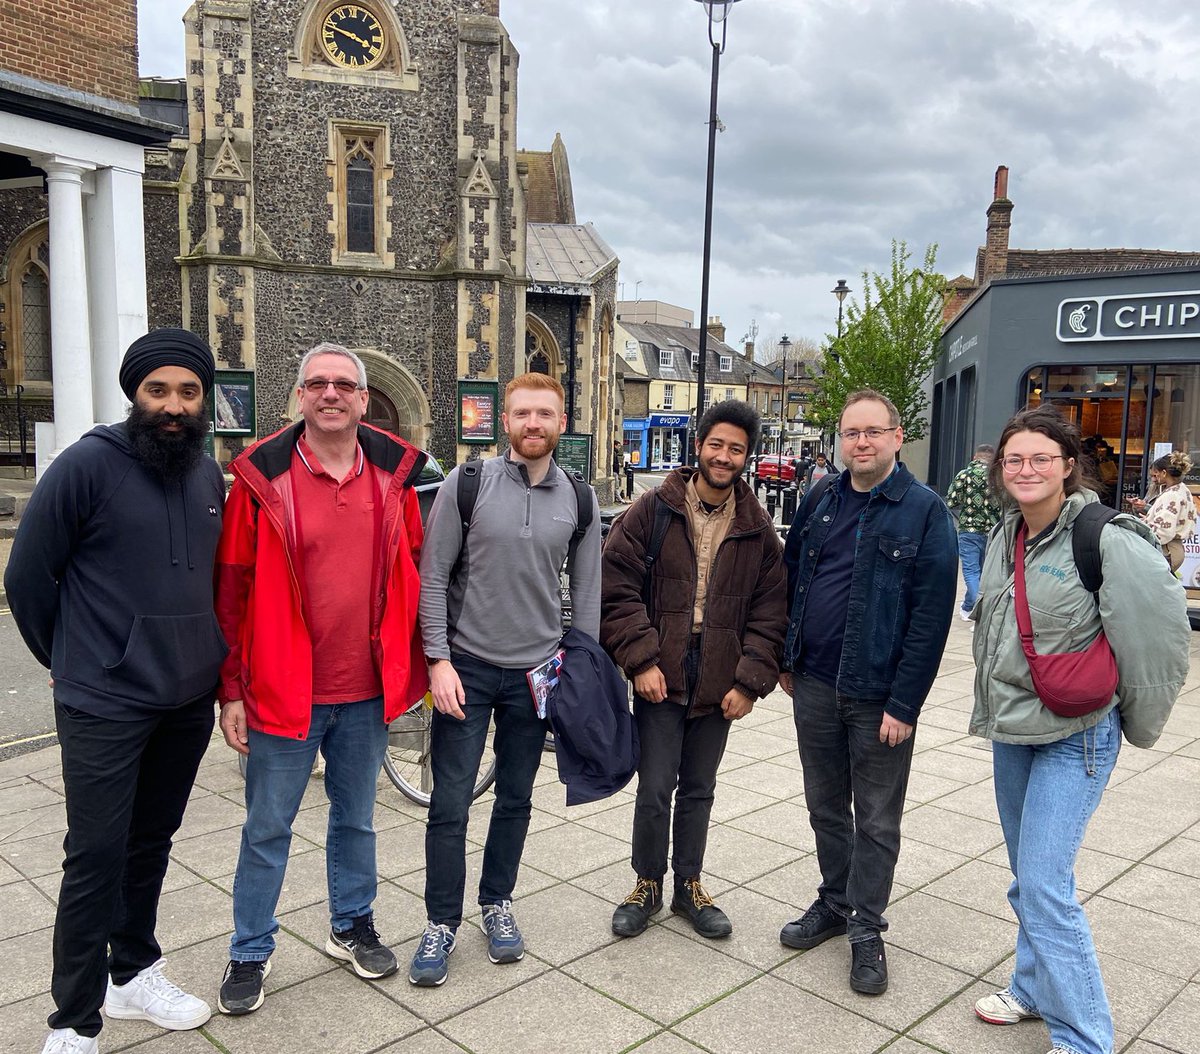 Out today in Uxbridge - a real feeling on the doorstep that people want an election now and a chance to change the direction of the country. Come rain or shine we’re out working to deliver a @UKLabour MP & Government 🌹